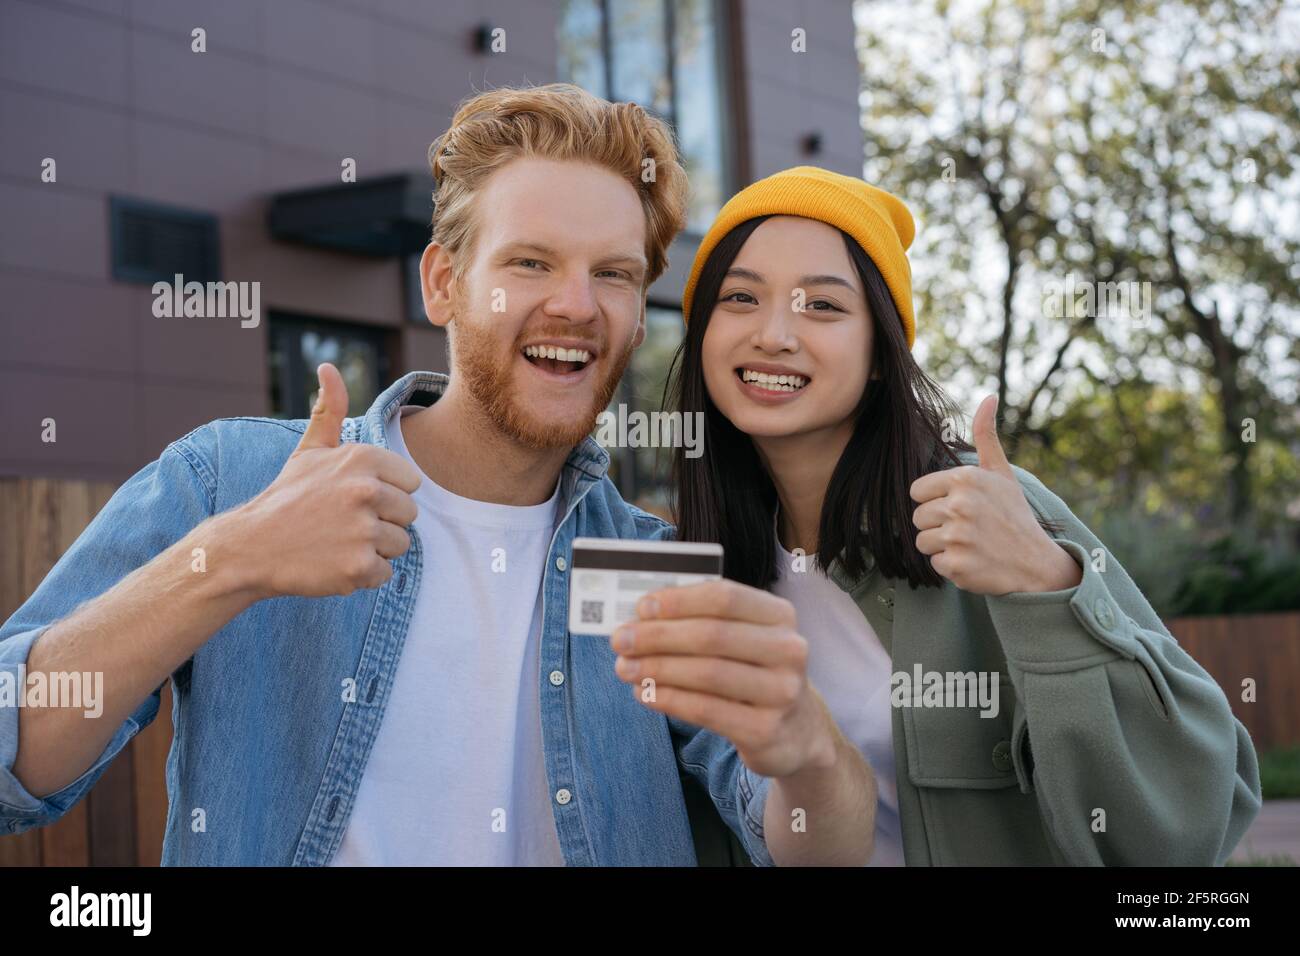 Couple of smiling mixed race friends holding credit card showing thumb up looking at camera Stock Photo